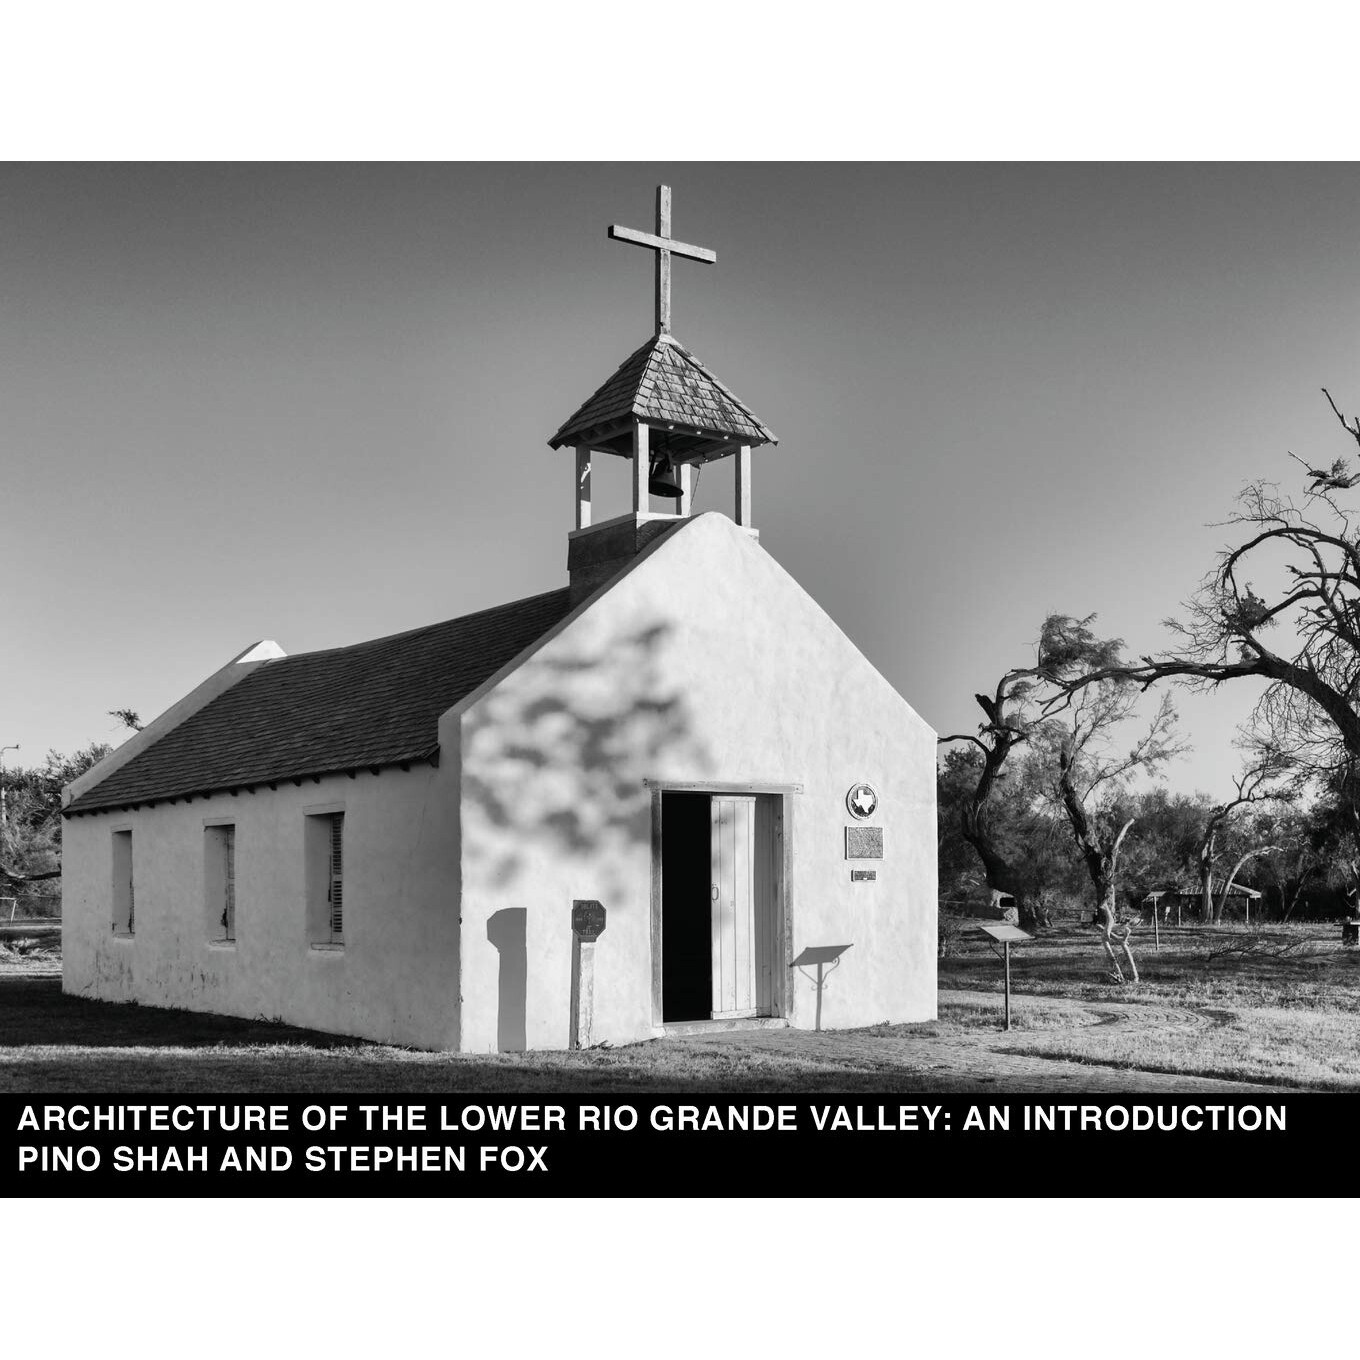 "Architecture of the Lower Rio Grande Valley: An Introduction" by Pino Shah and Stephen Fox